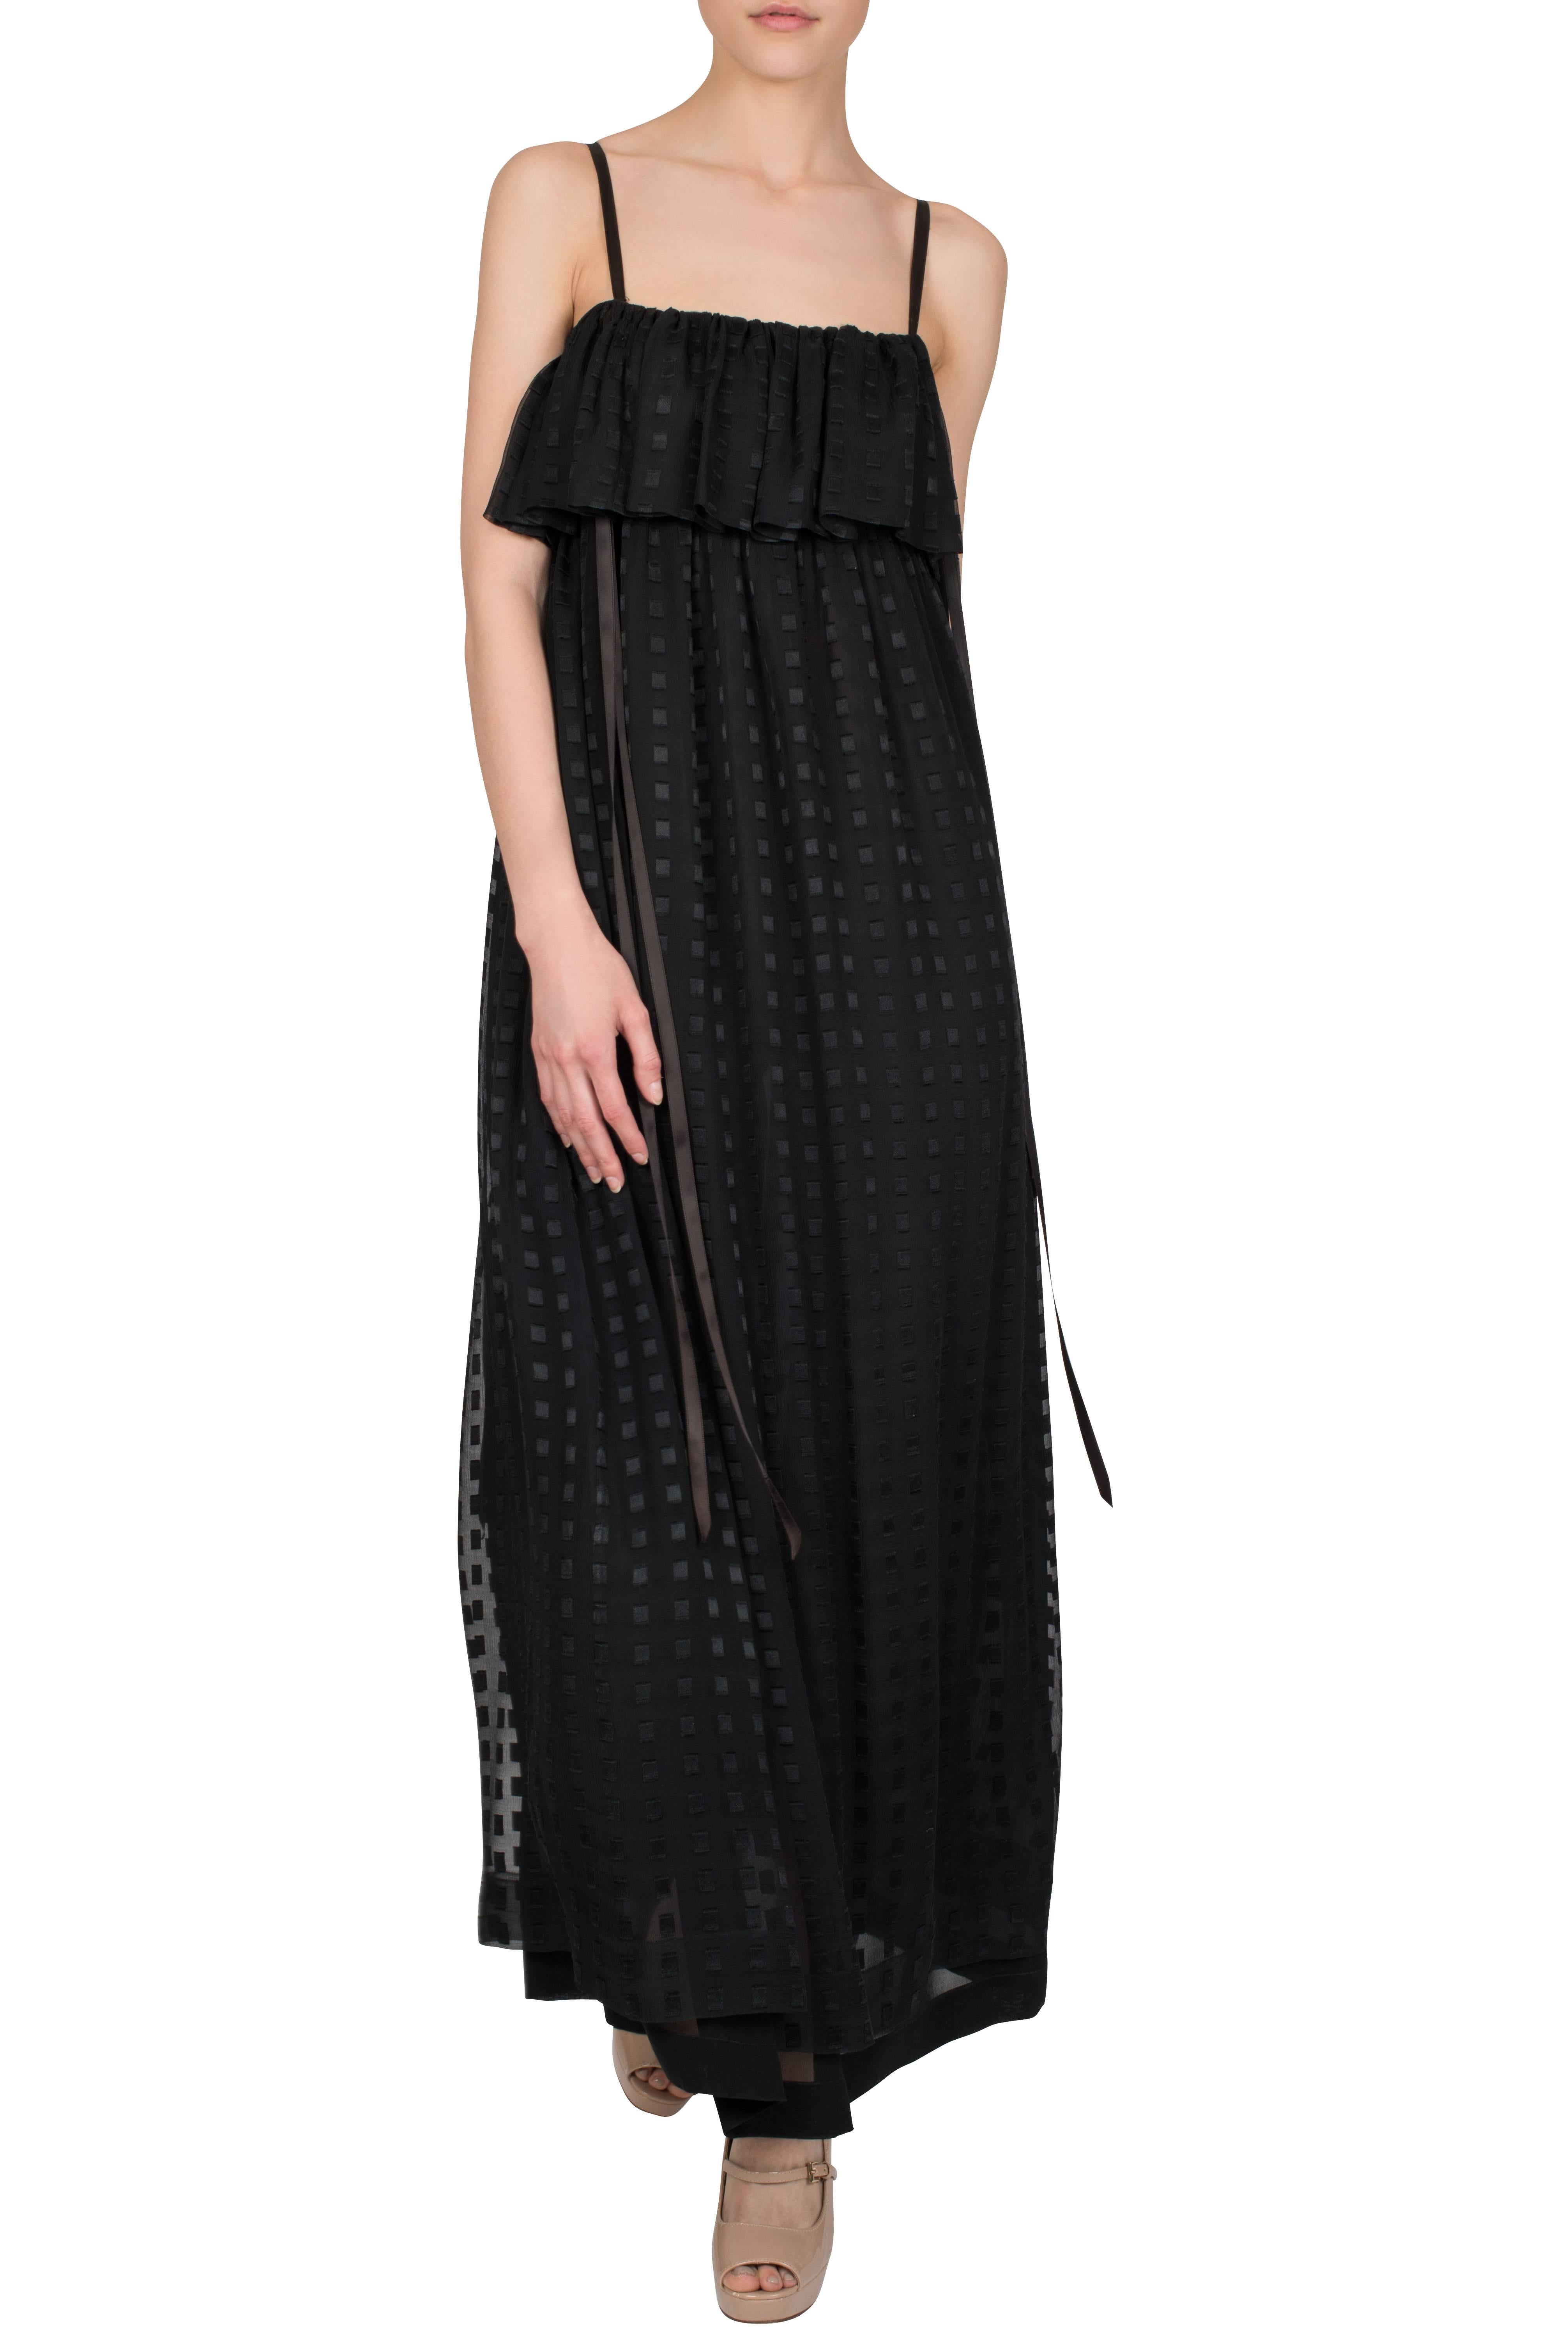 An elegant 1980s Christian Dior Boutique sleeveless black silk chiffon evening dress with a layered neckline and embossed square pattern. The full-length dress features thin black silk straps and black silk ribbons that tie under the arms. The dress